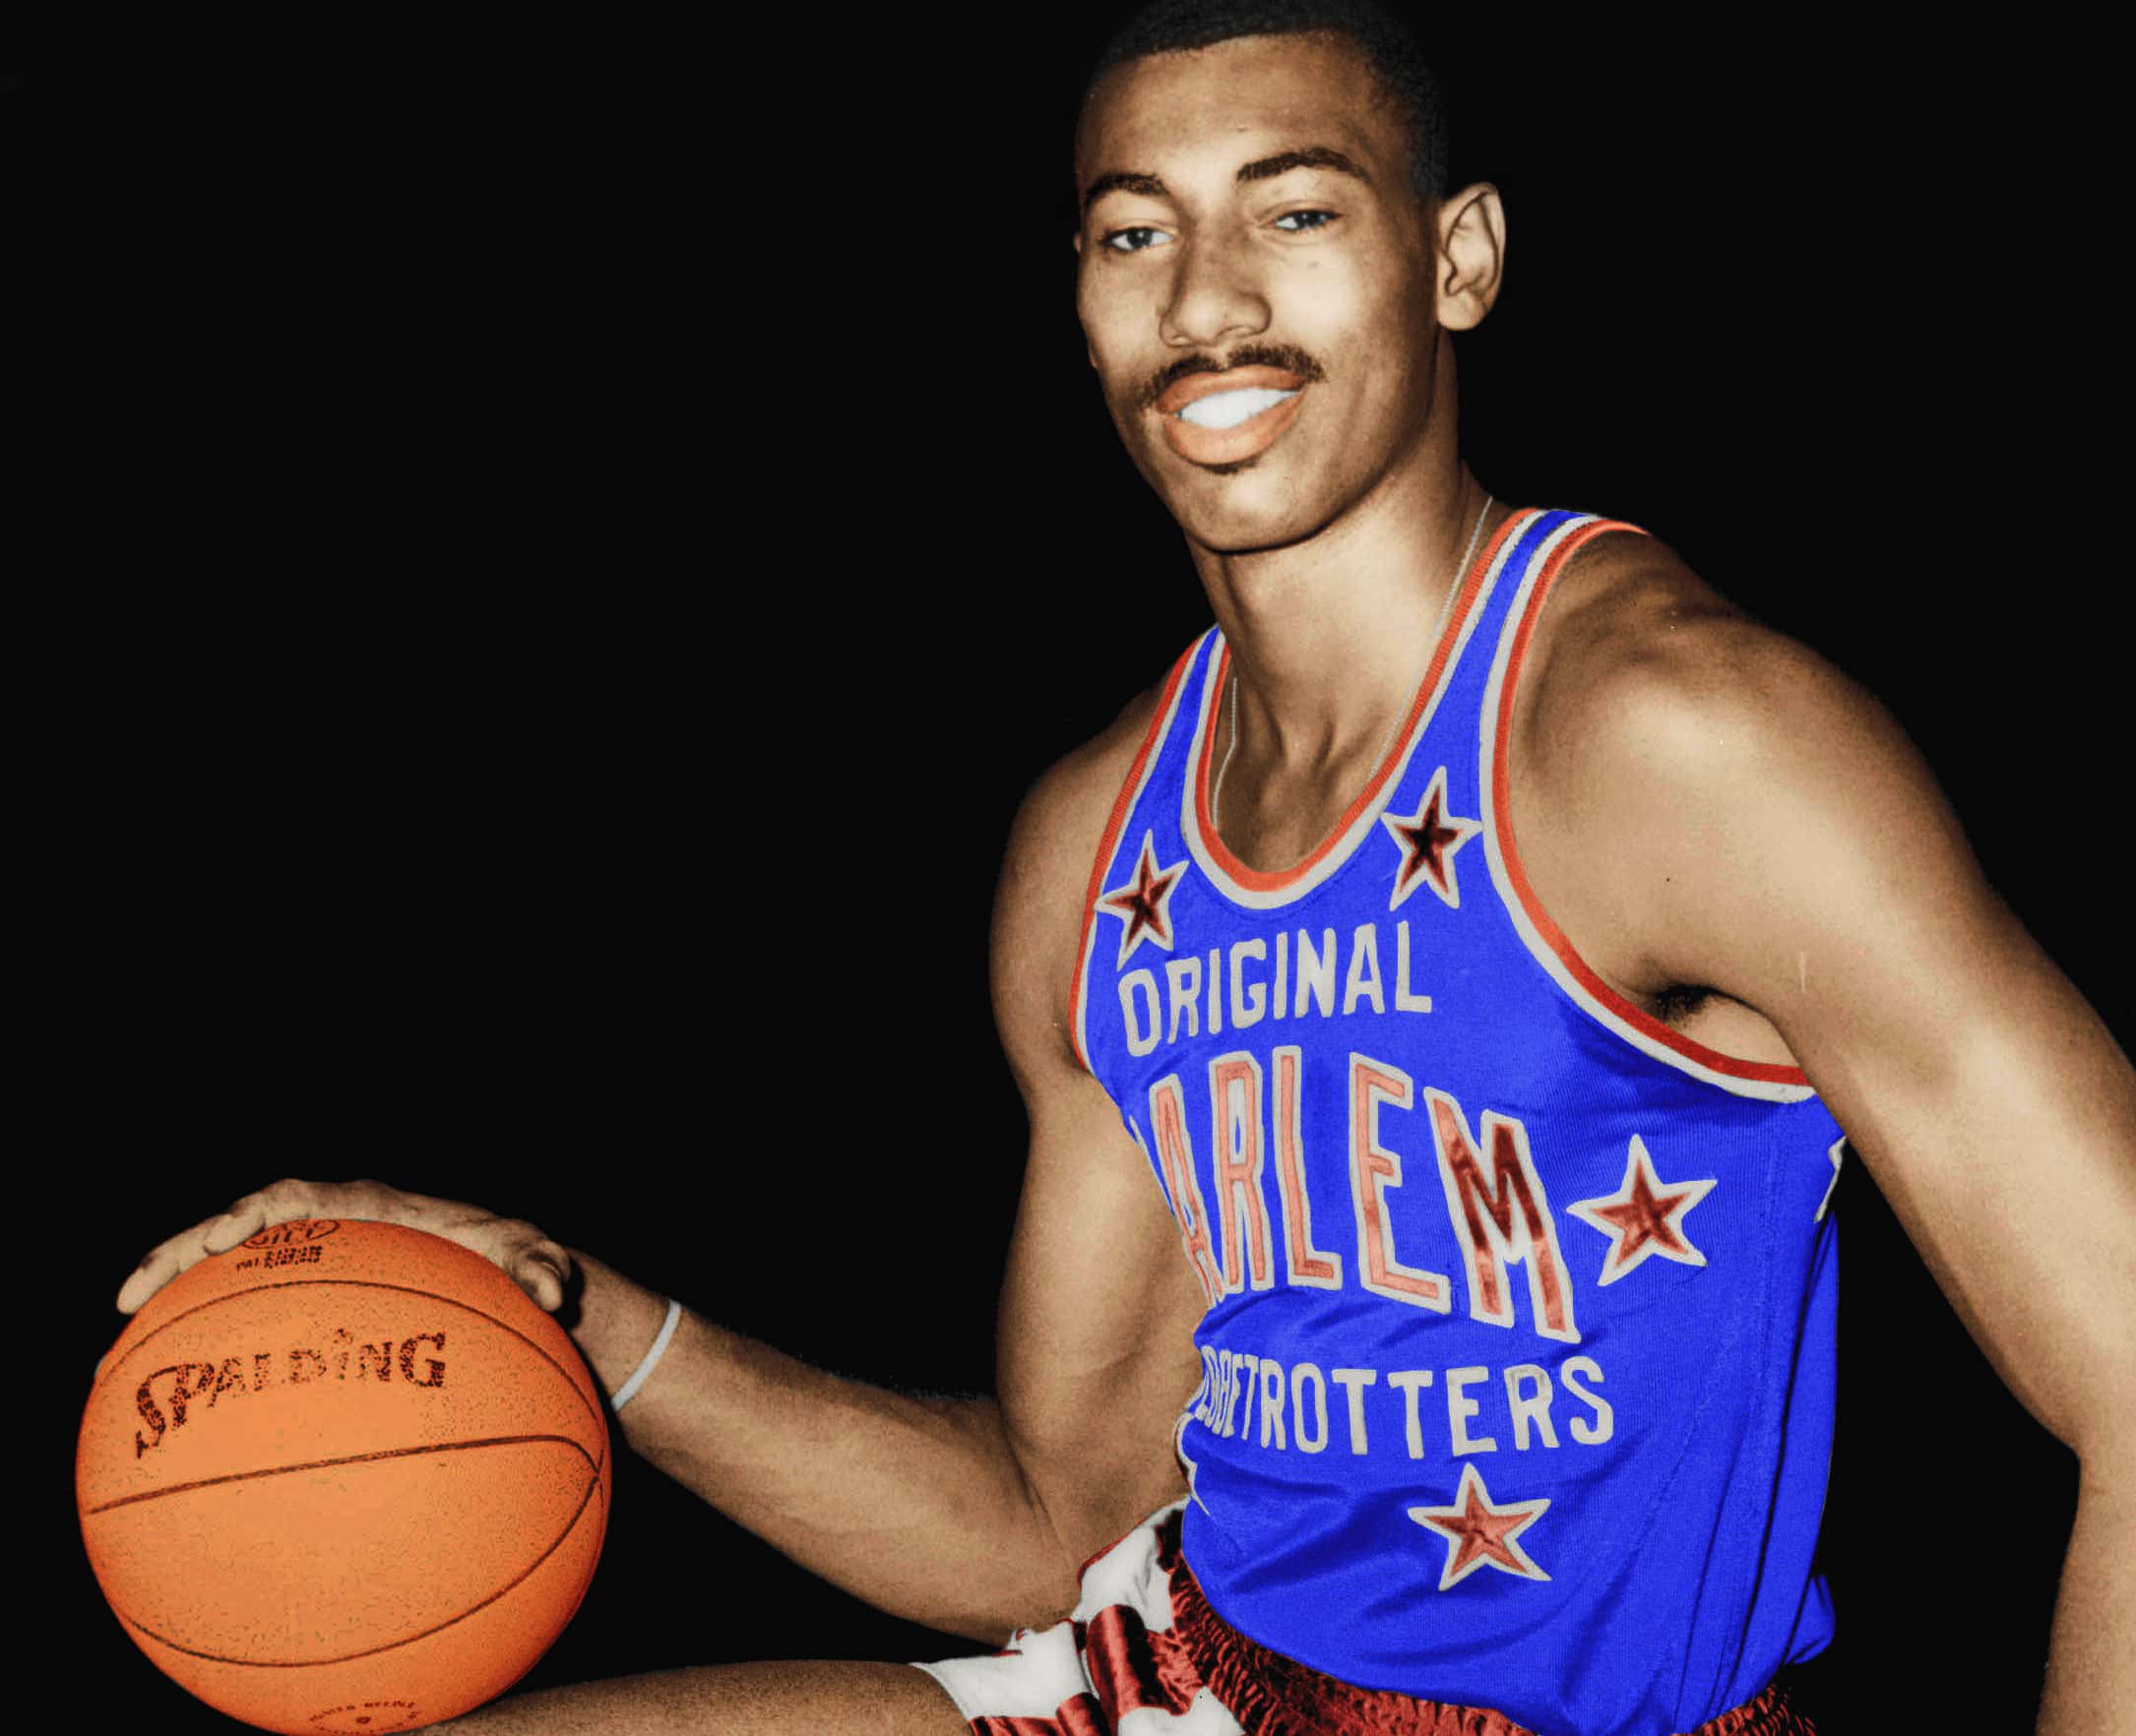 Goliath Facts About Wilt Chamberlain, The Big Dipper